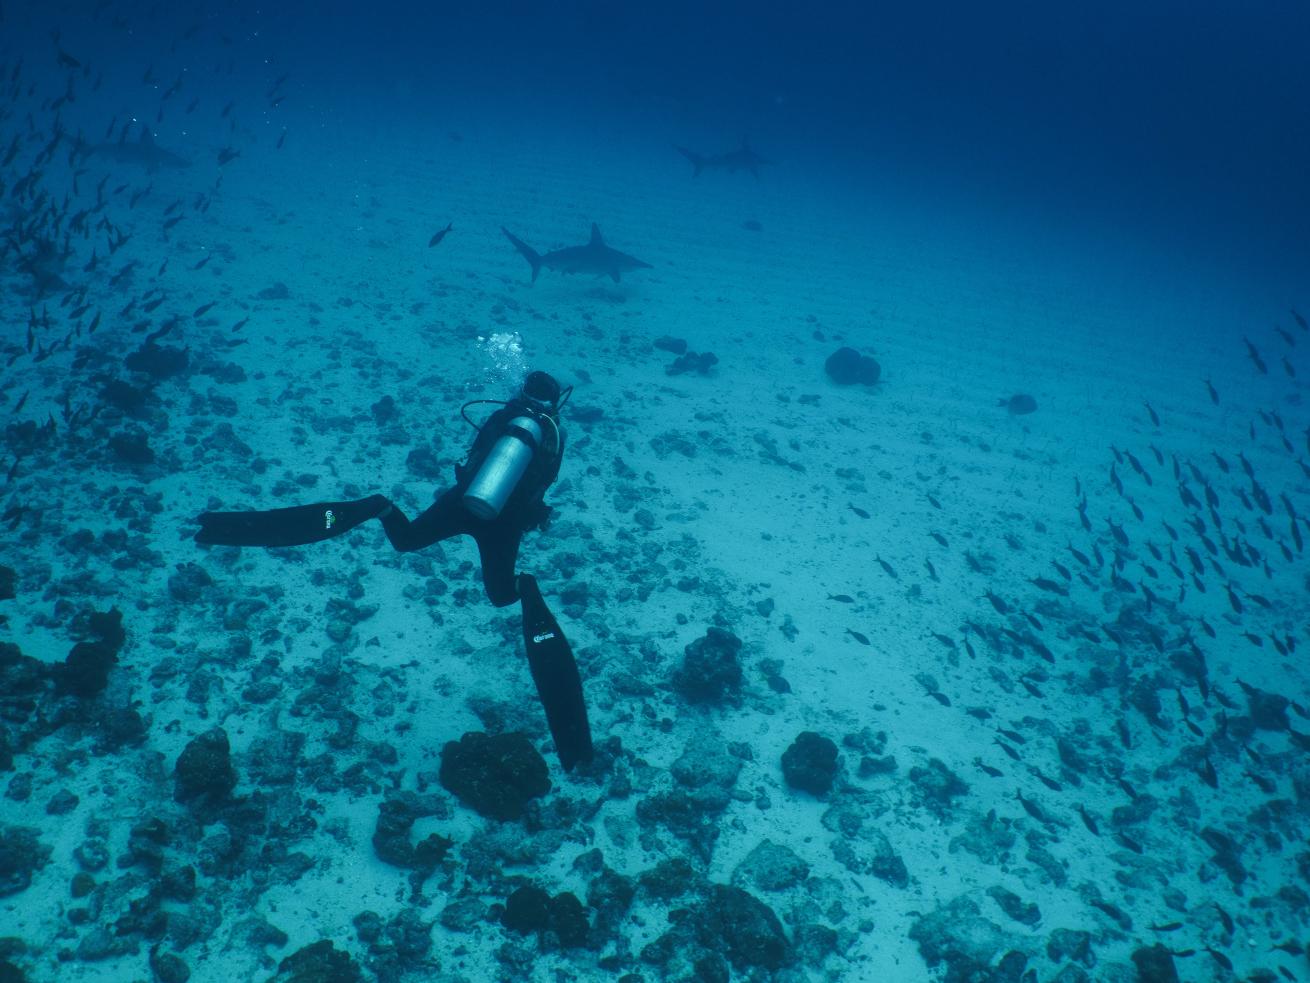 Freediver in the water with sharks in Galapagos.